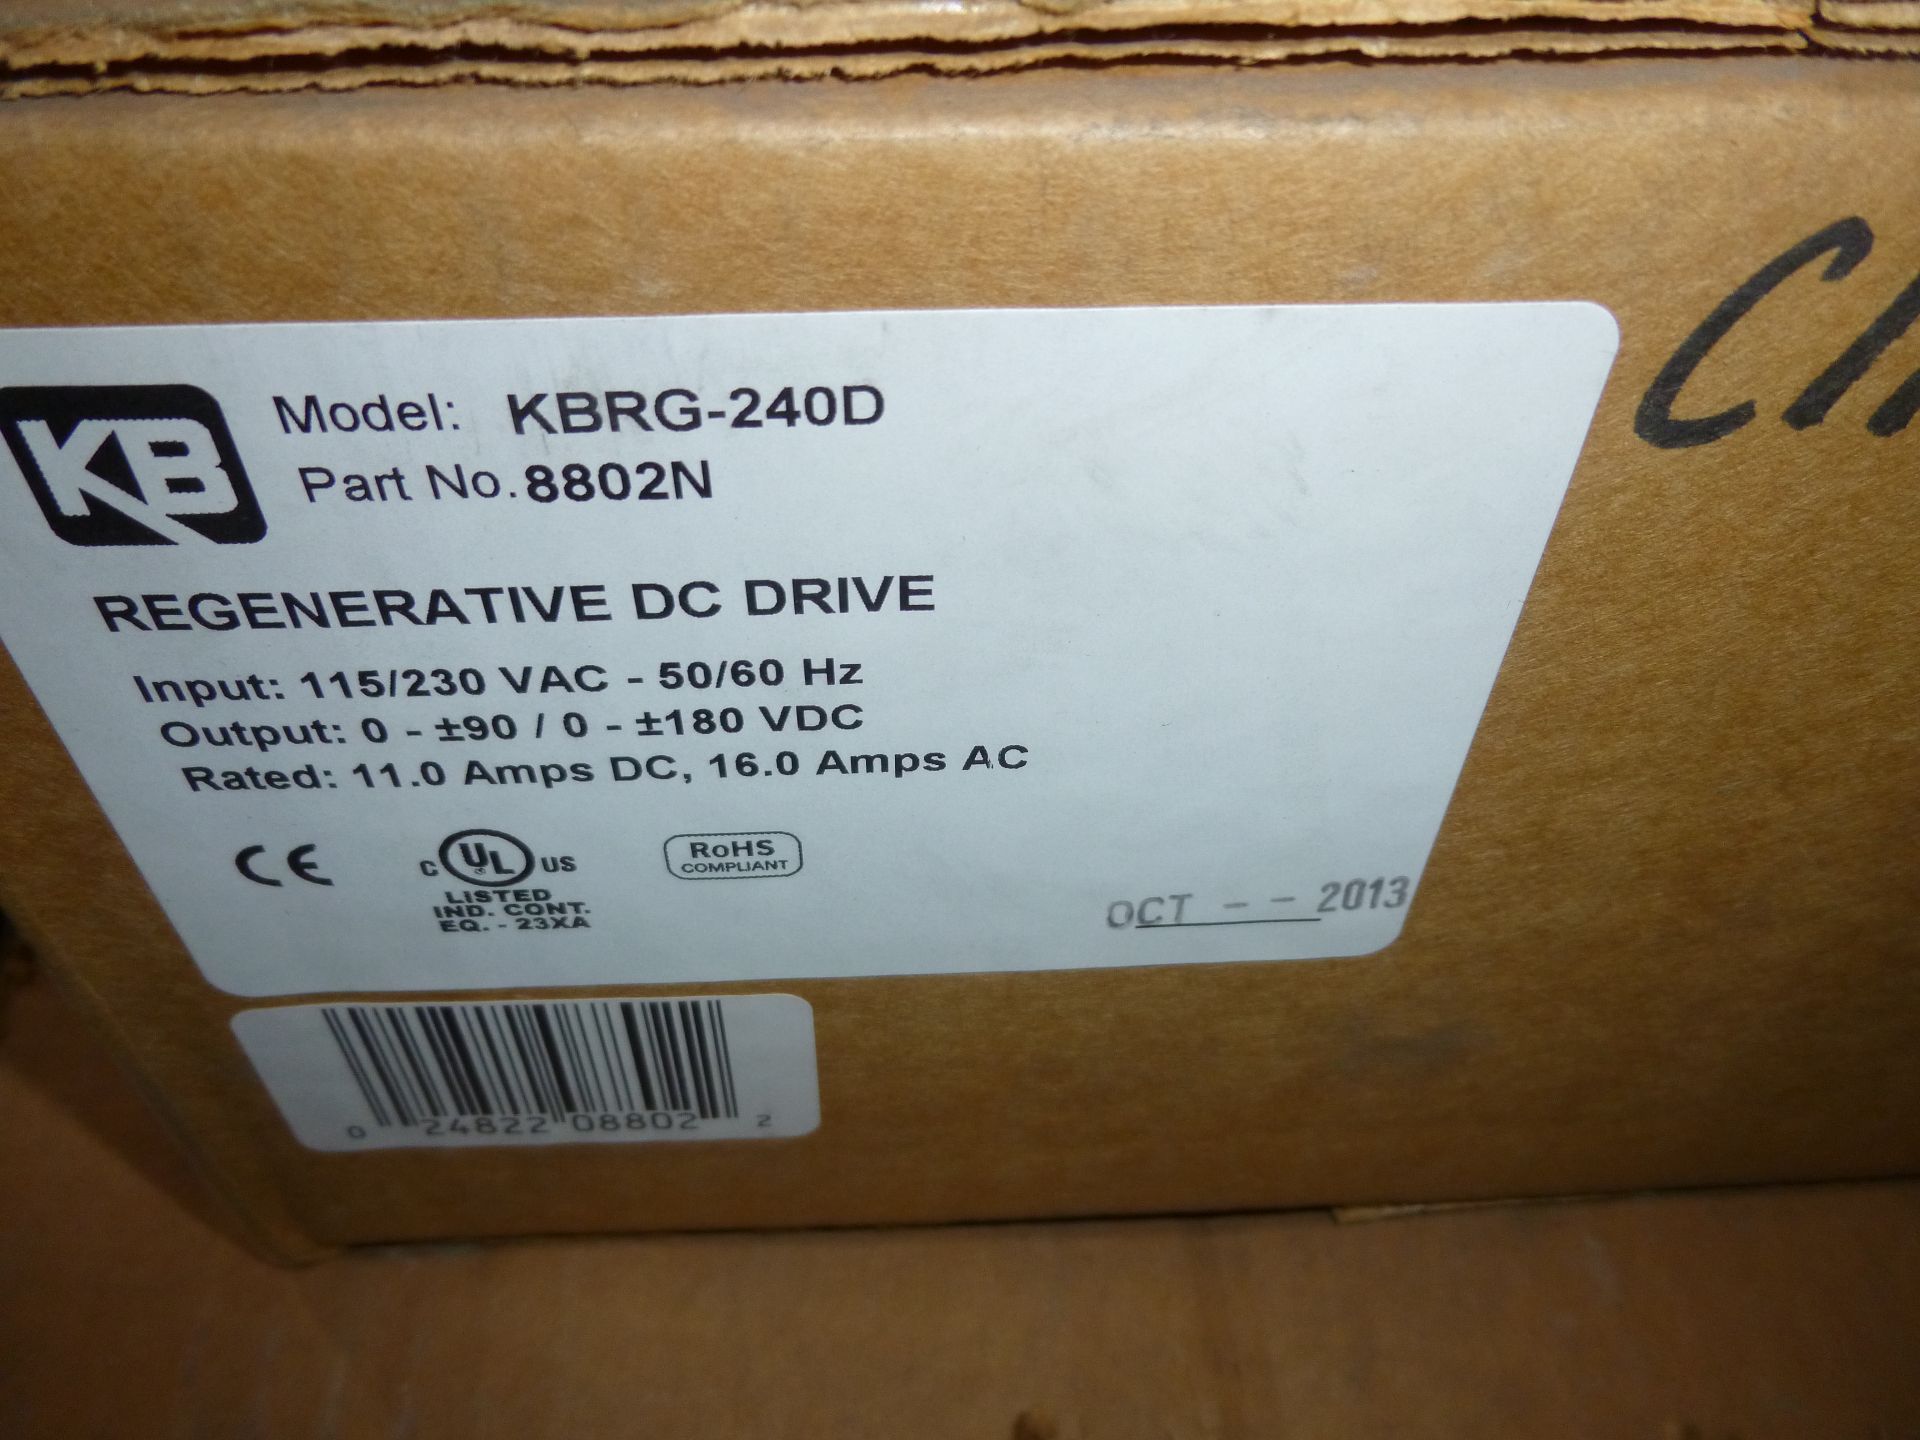 KB regenerative DC drive model KBRG-240D, new in box, as always with Brolyn LLC auctions, all lots - Image 2 of 2